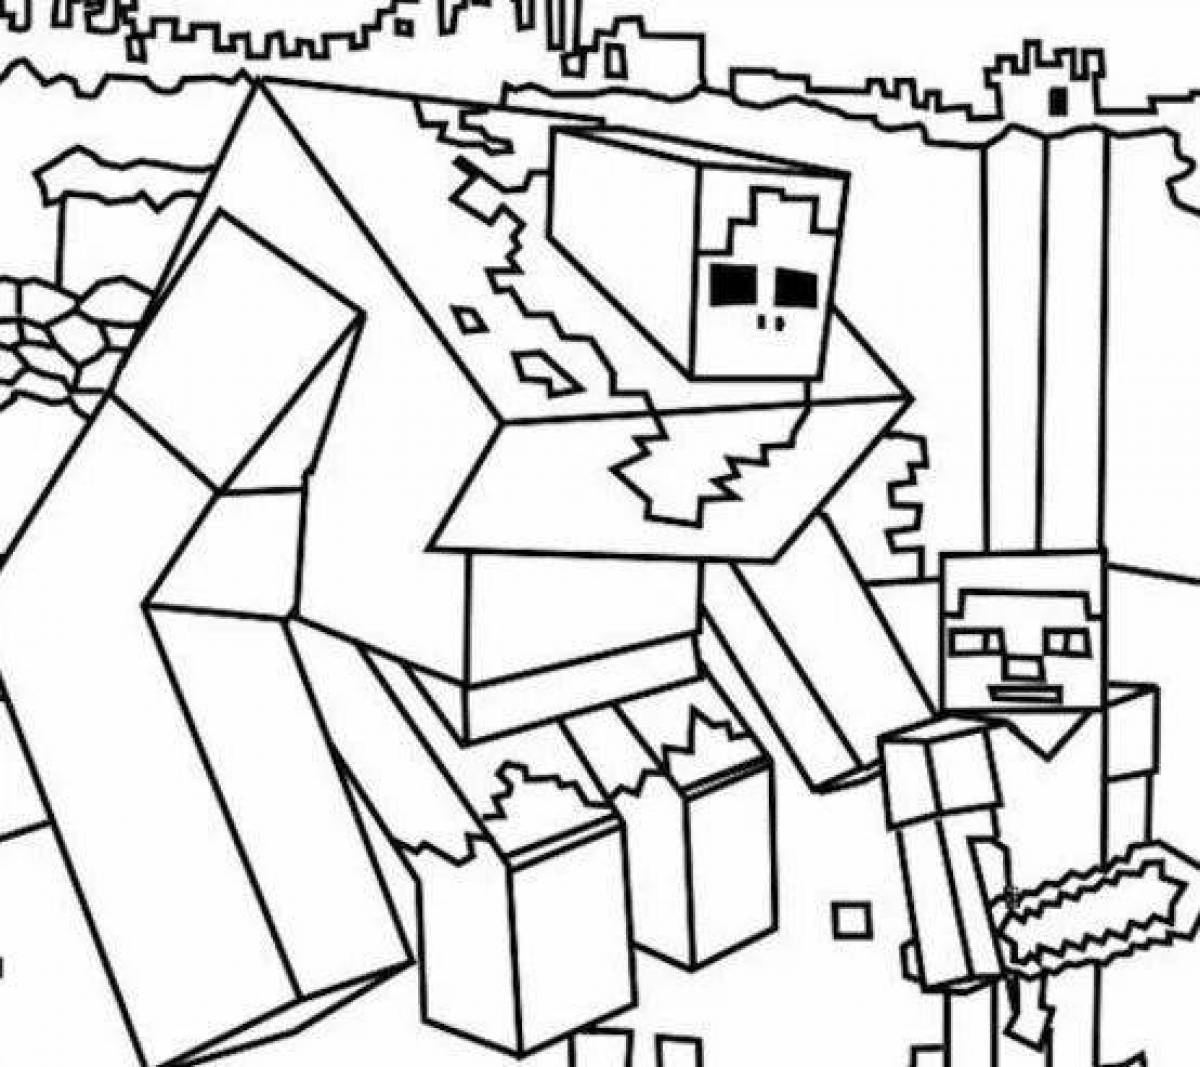 Coloring pages with bright minecraft characters